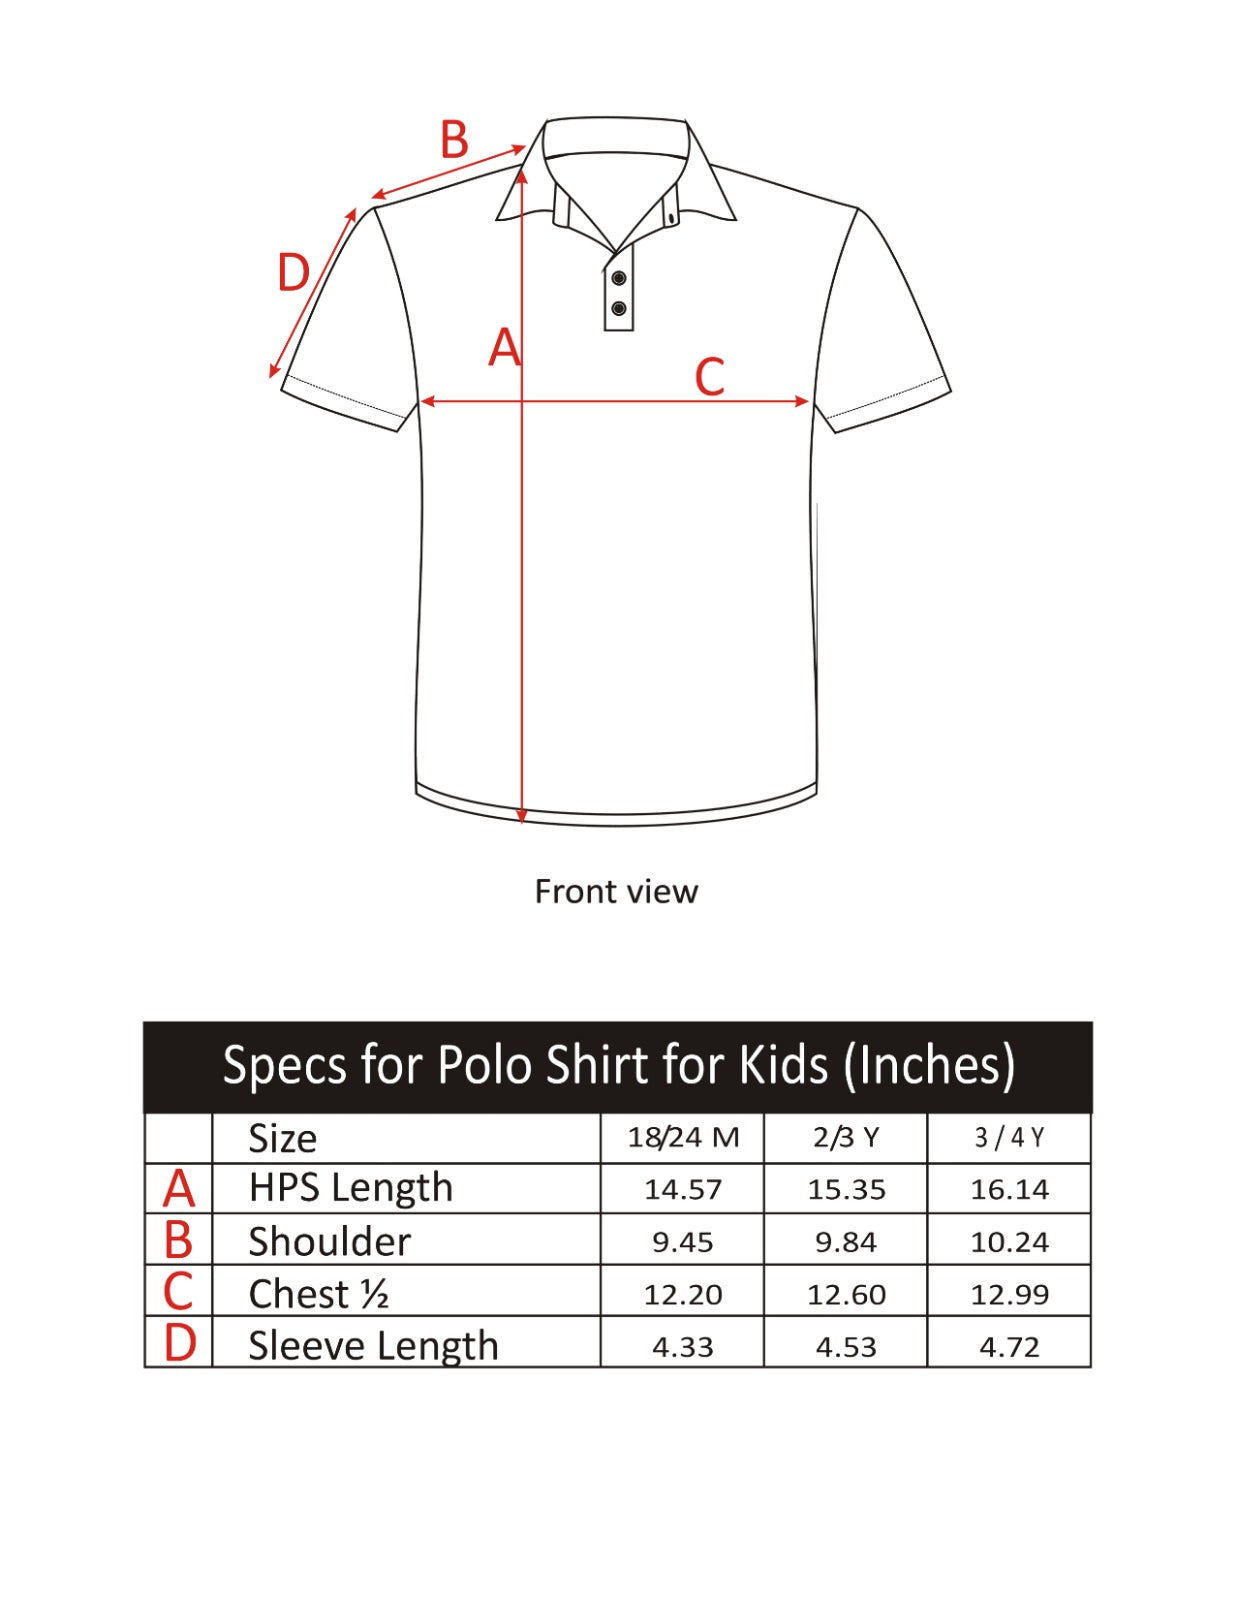 KIDS POLO BLACK FRONT EMBROIDERY